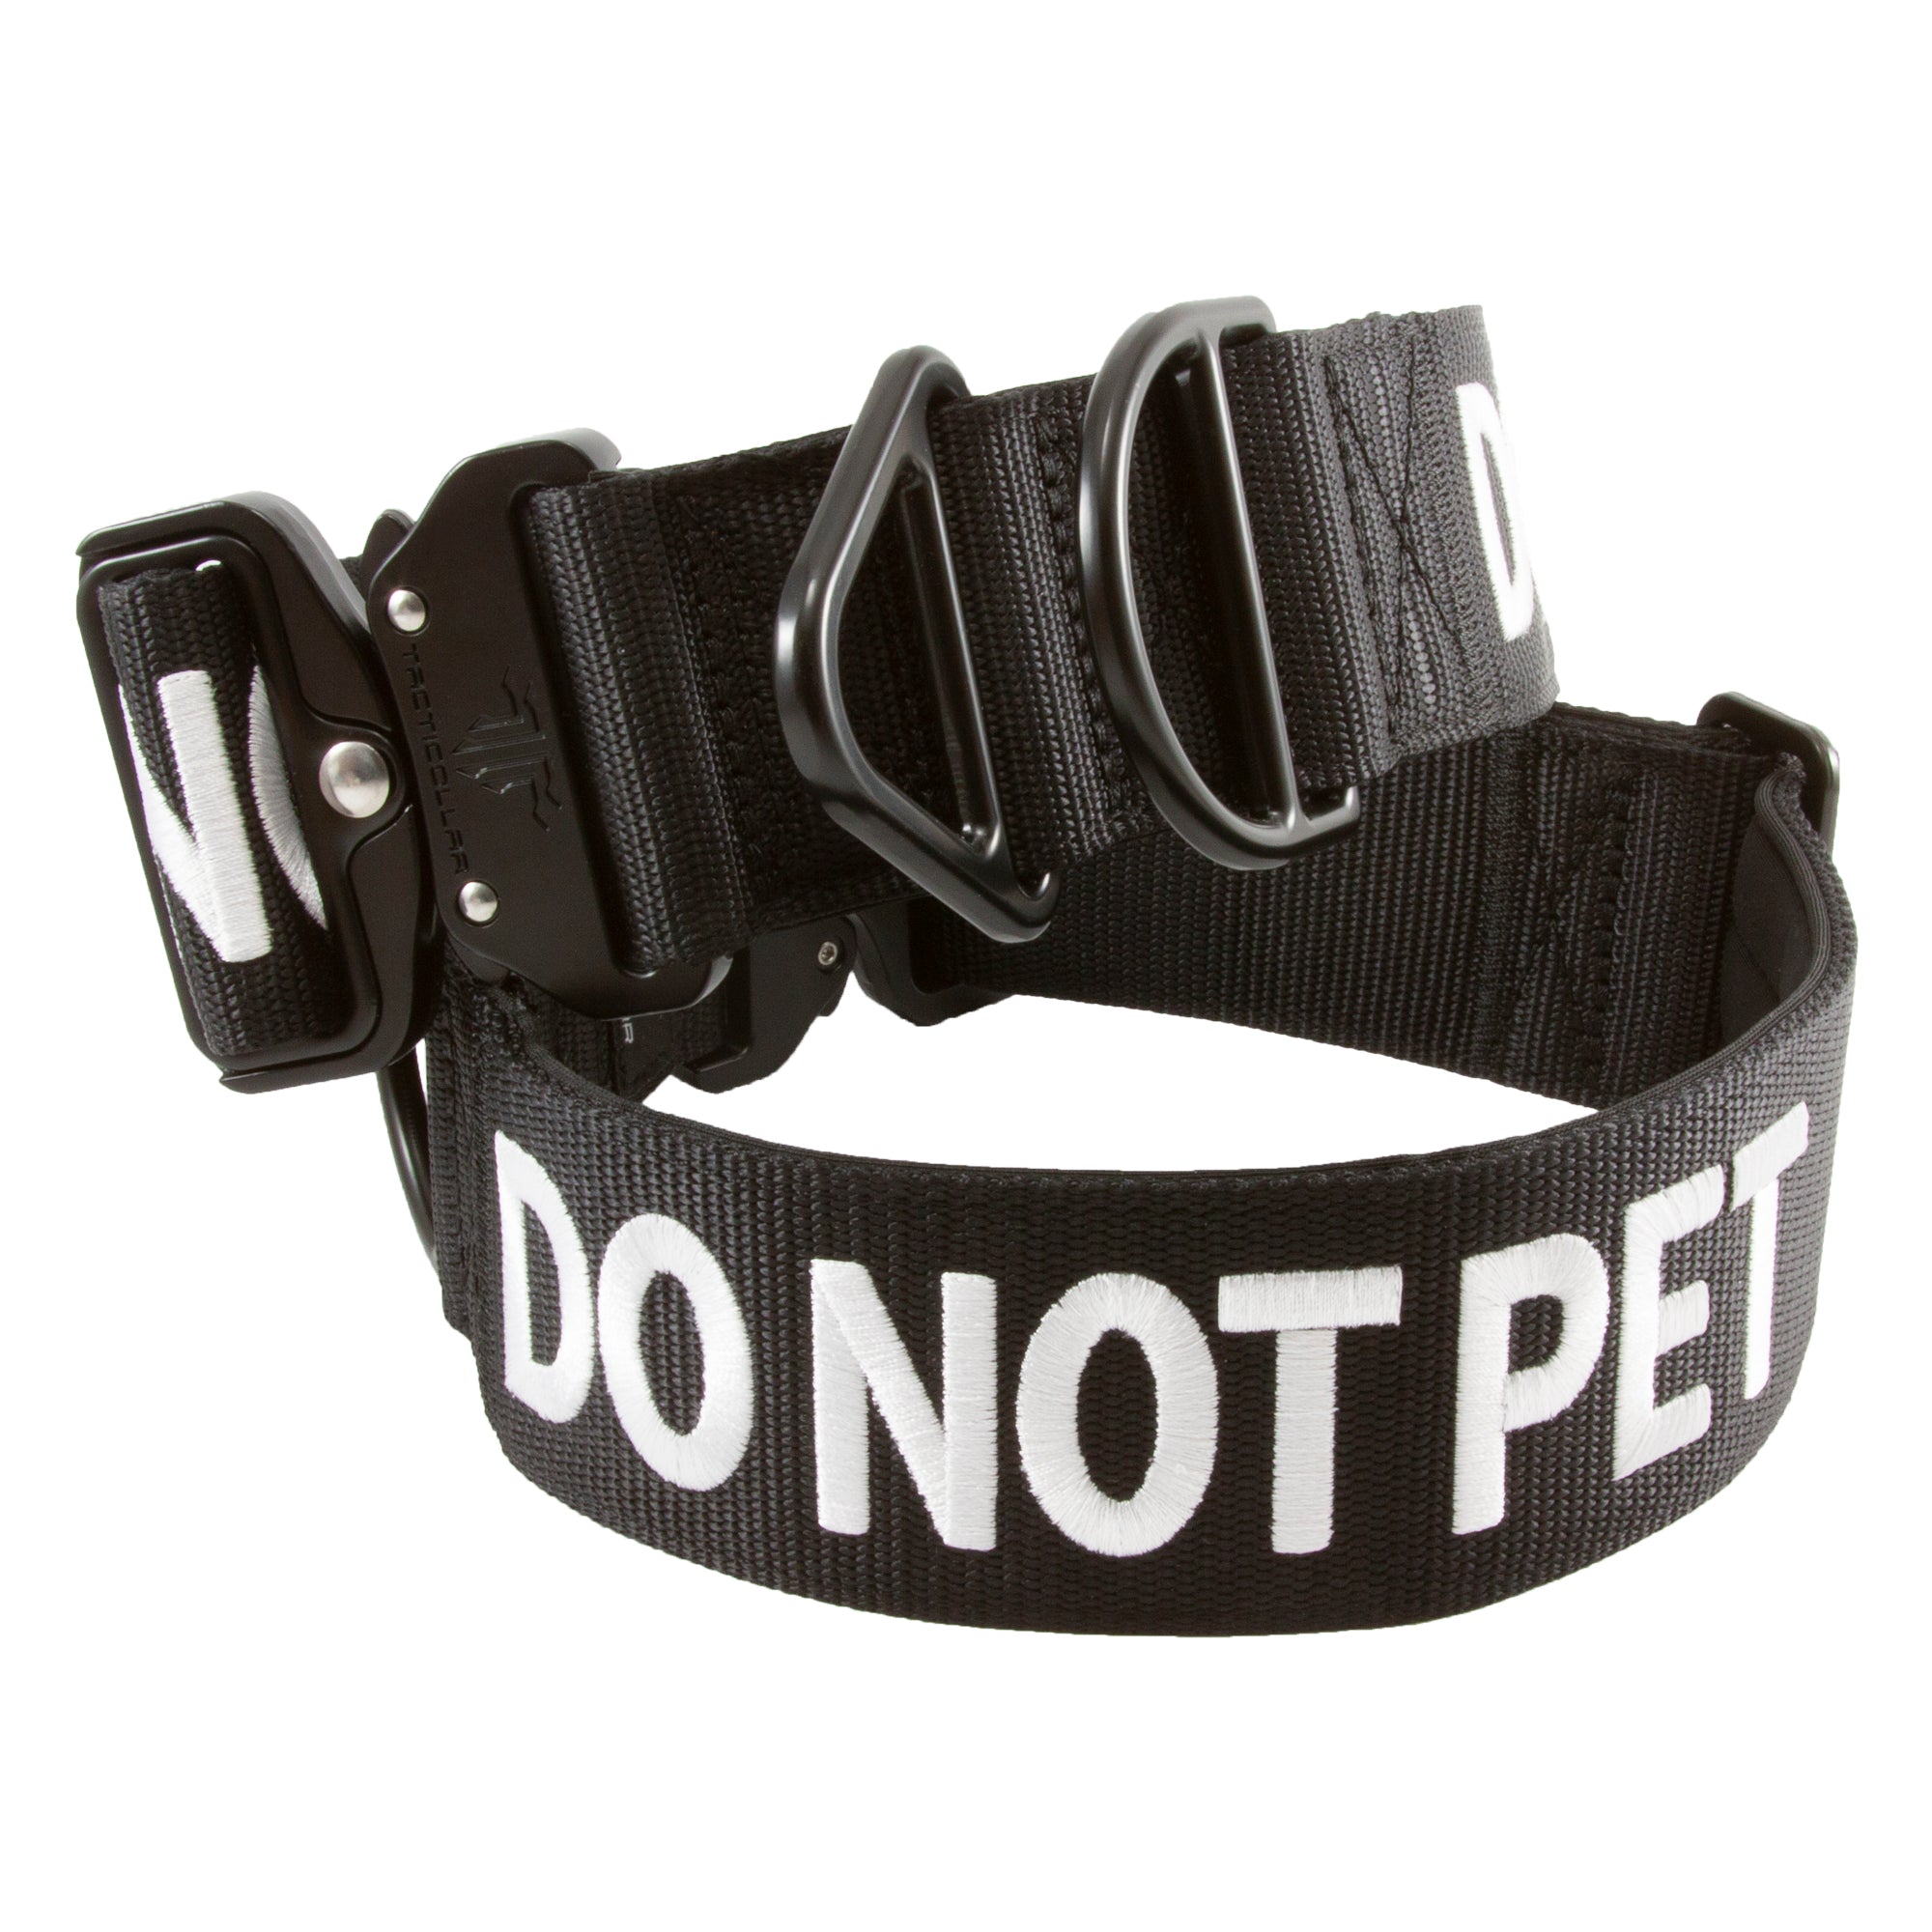 Do Not Pet dog collar, working dogs, reactive dogs, training dogs, dogs that need space.